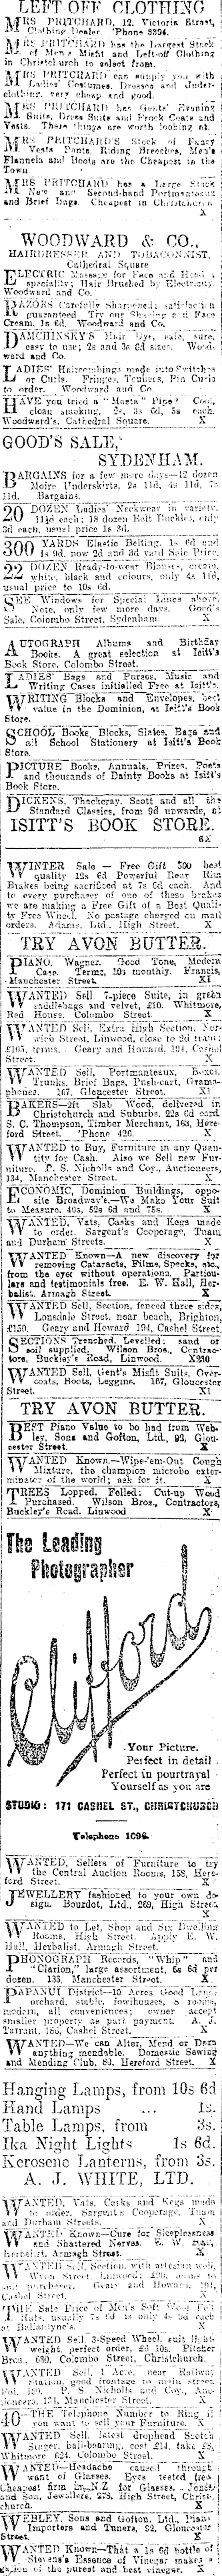 Papers Past Newspapers Star Christchurch 15 July 1914 Page 3 Advertisements Column 4